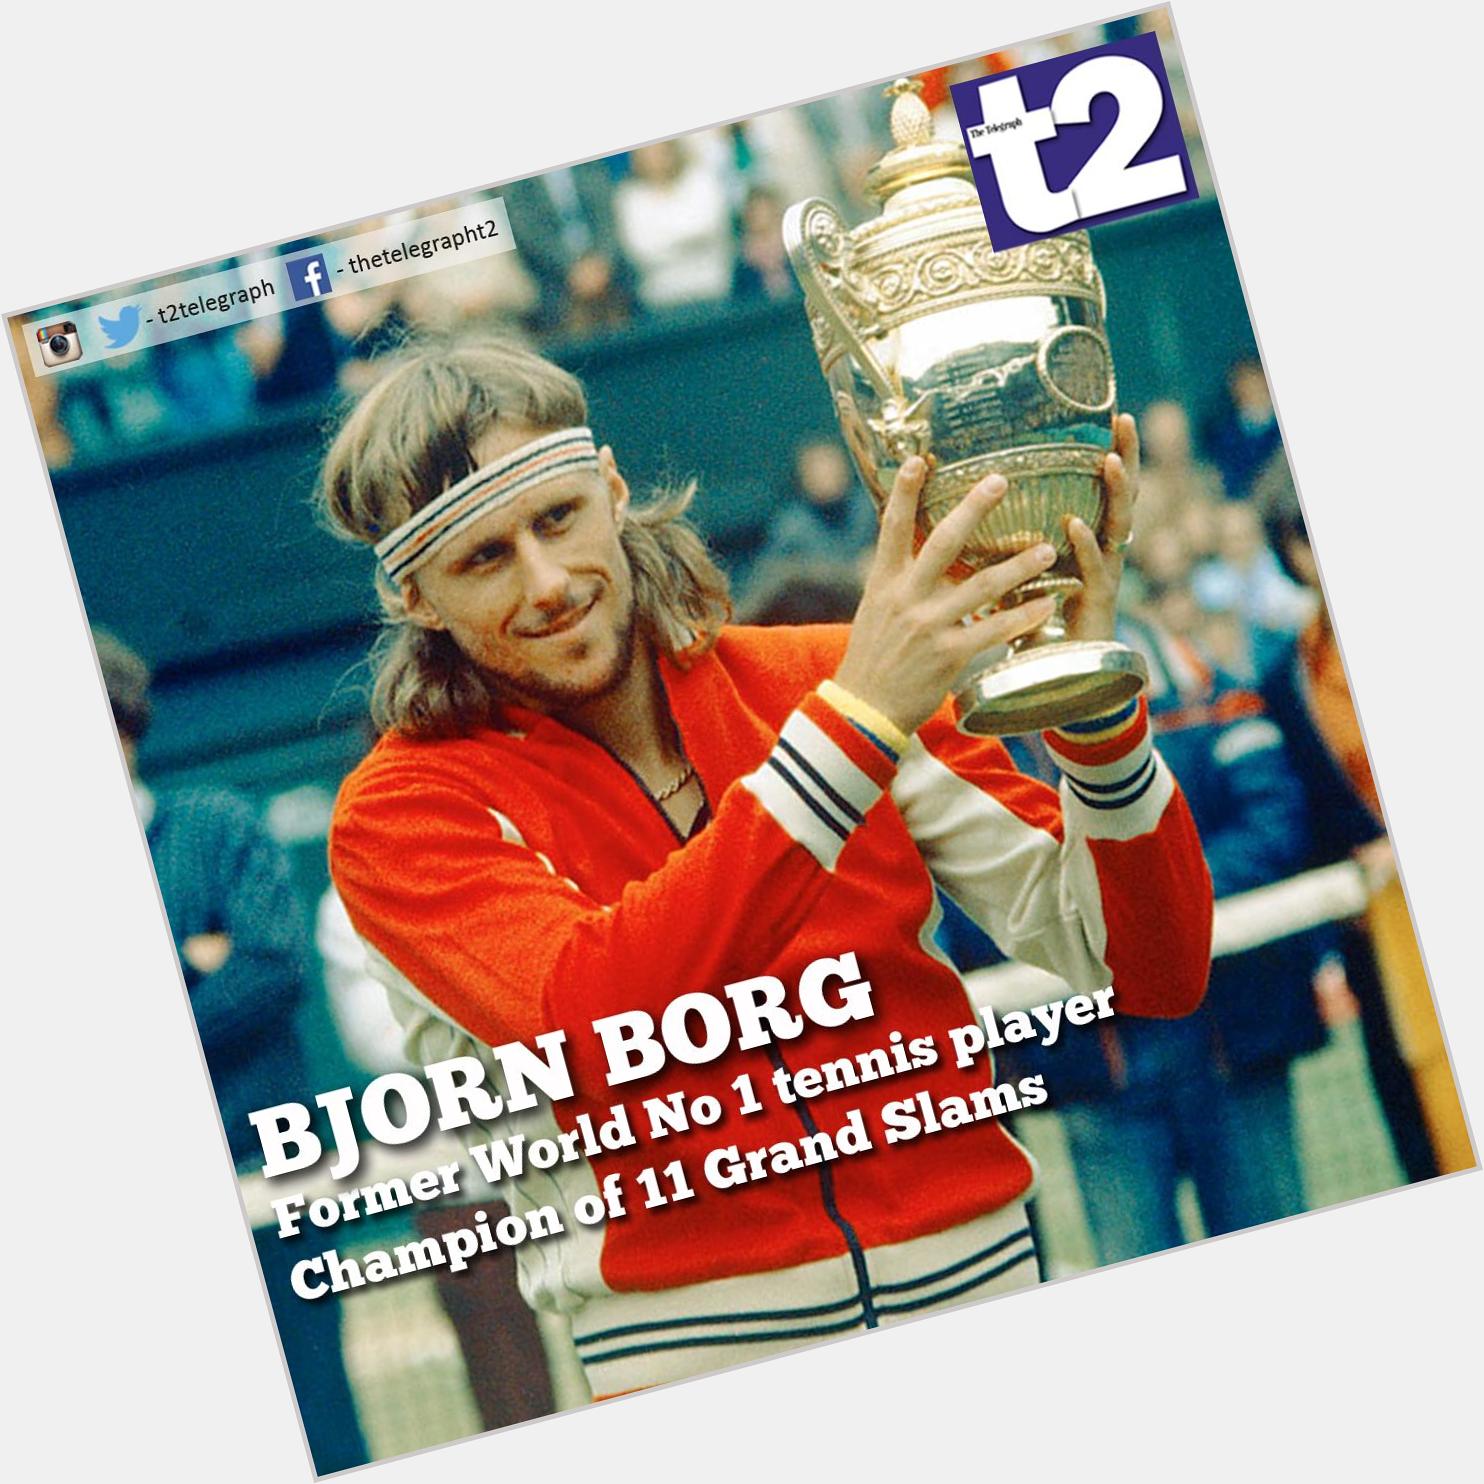 Happy Birthday to Bjorn Borg, former world No 1 tennis player from Sweden. 